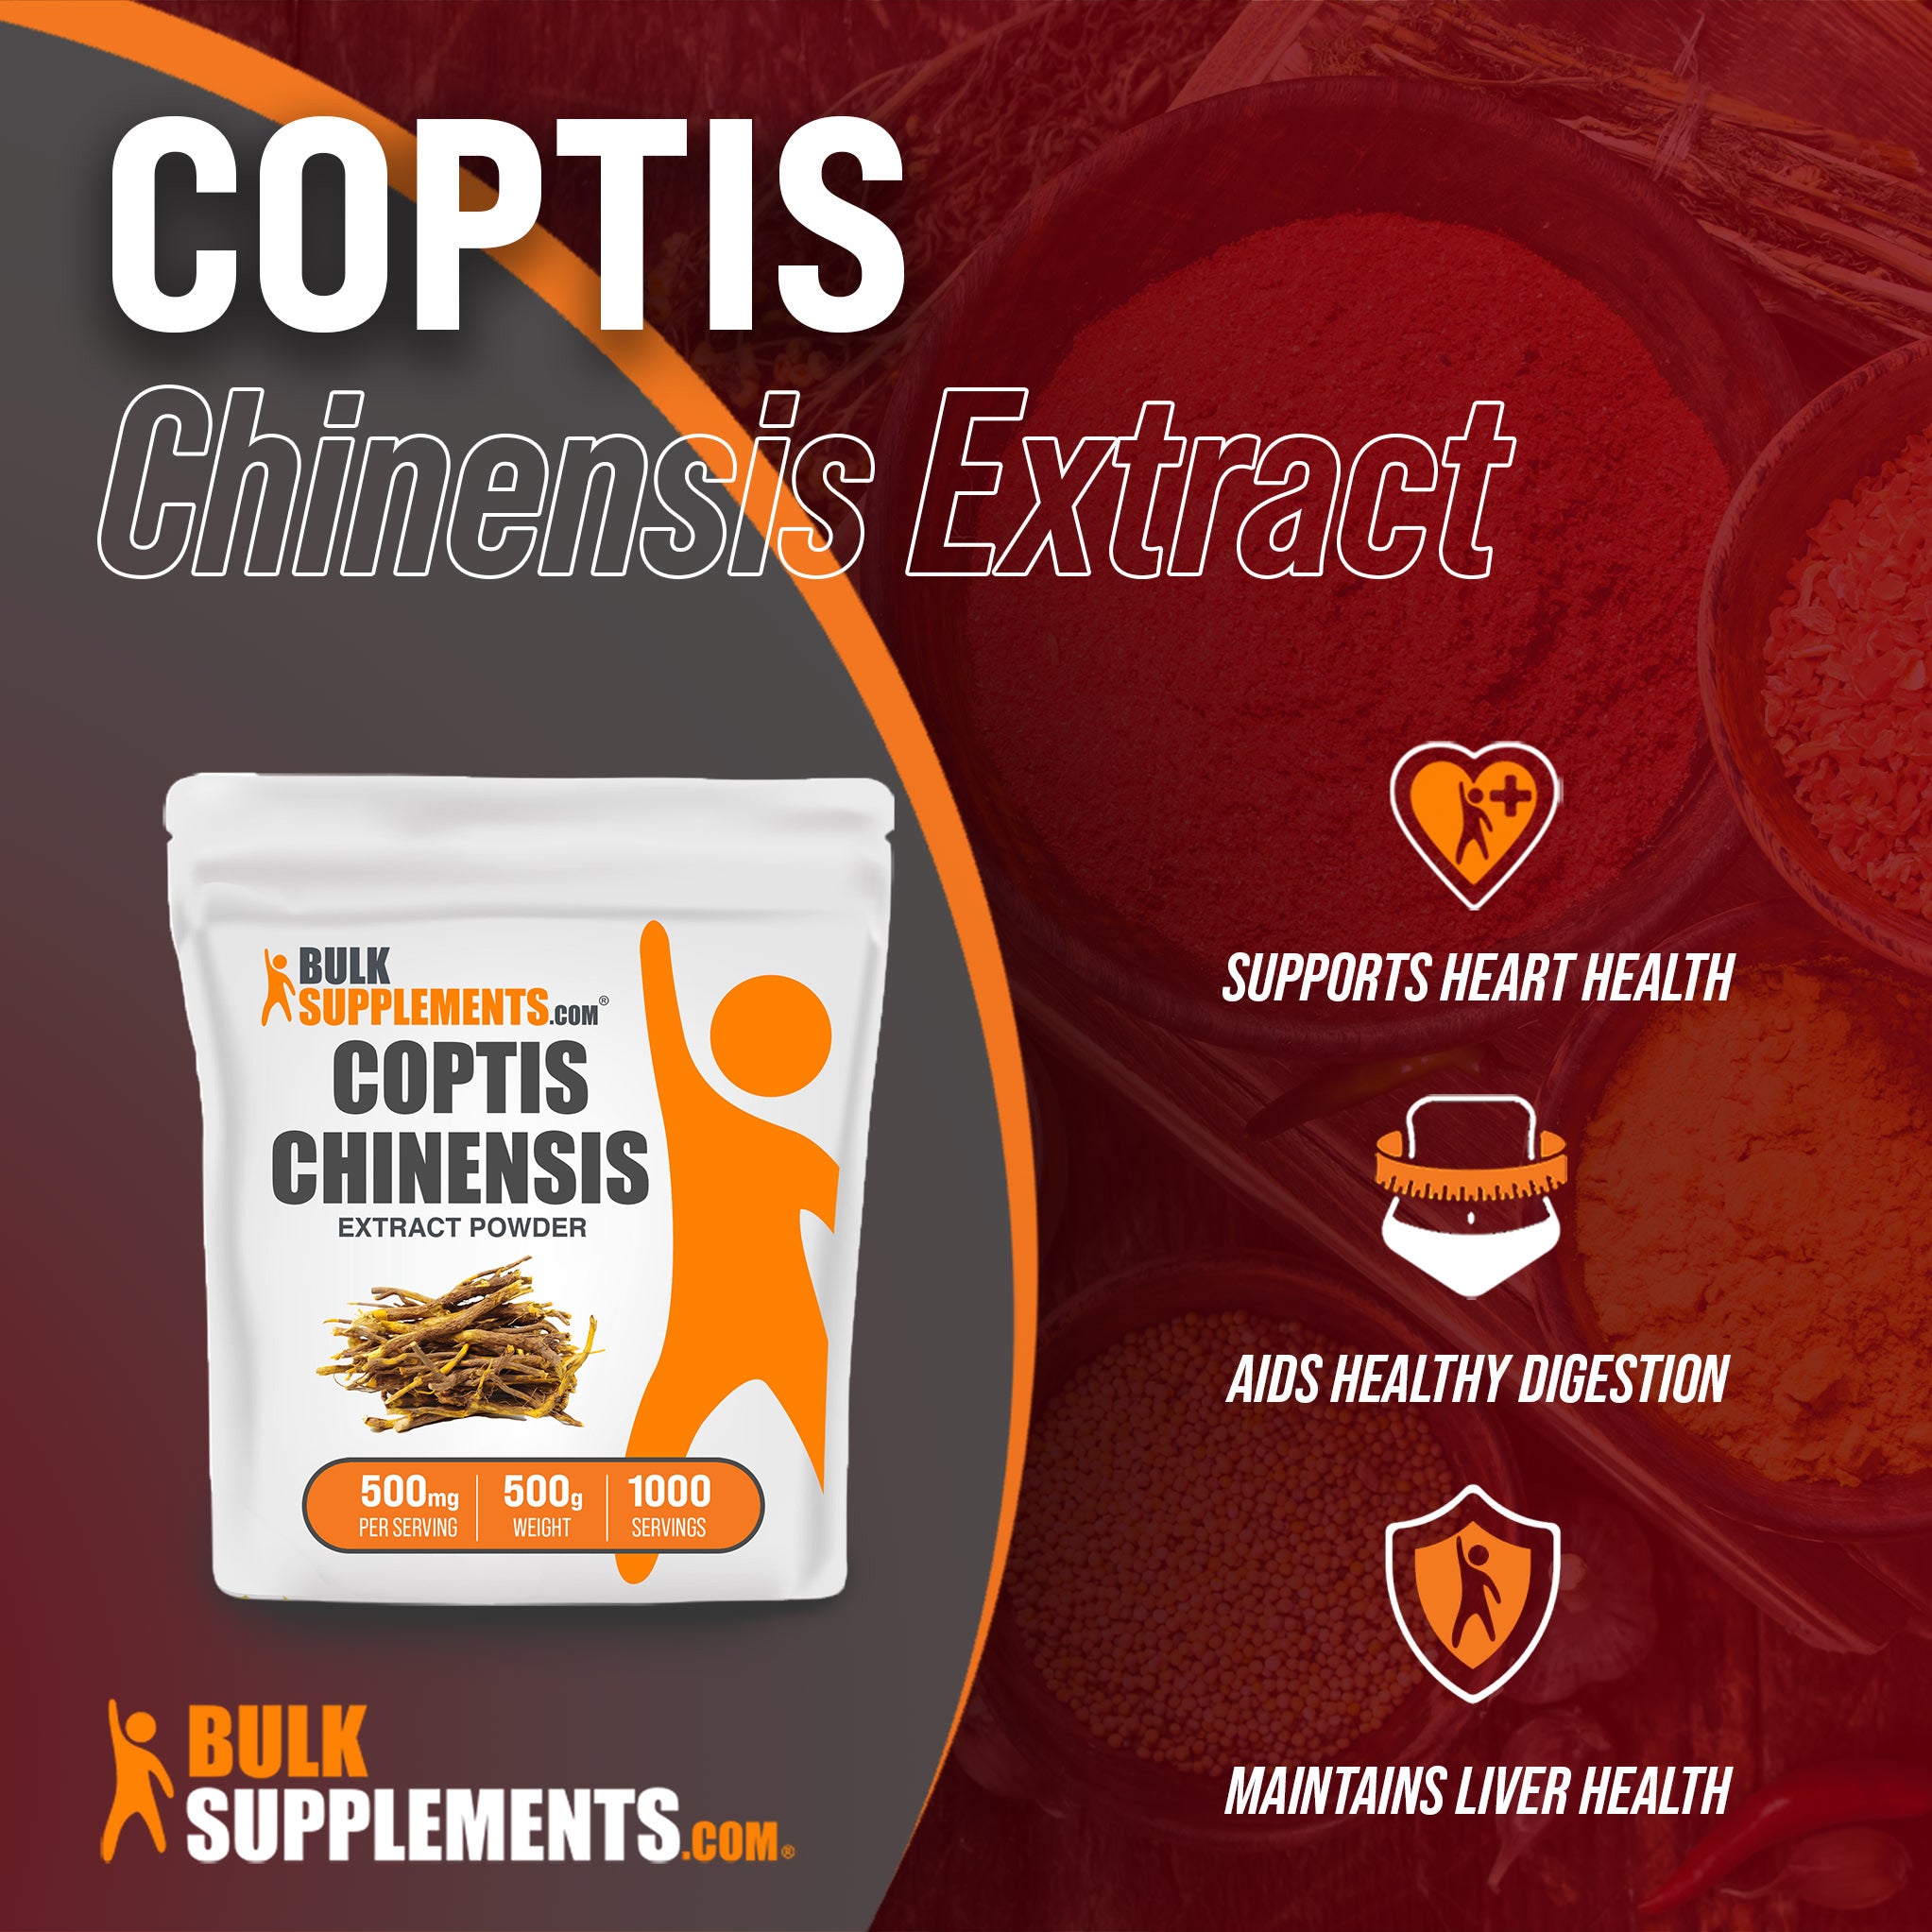 Benefits of 500g Coptis Chinensis; supports heart health, aids healthy digestion, maintains liver health